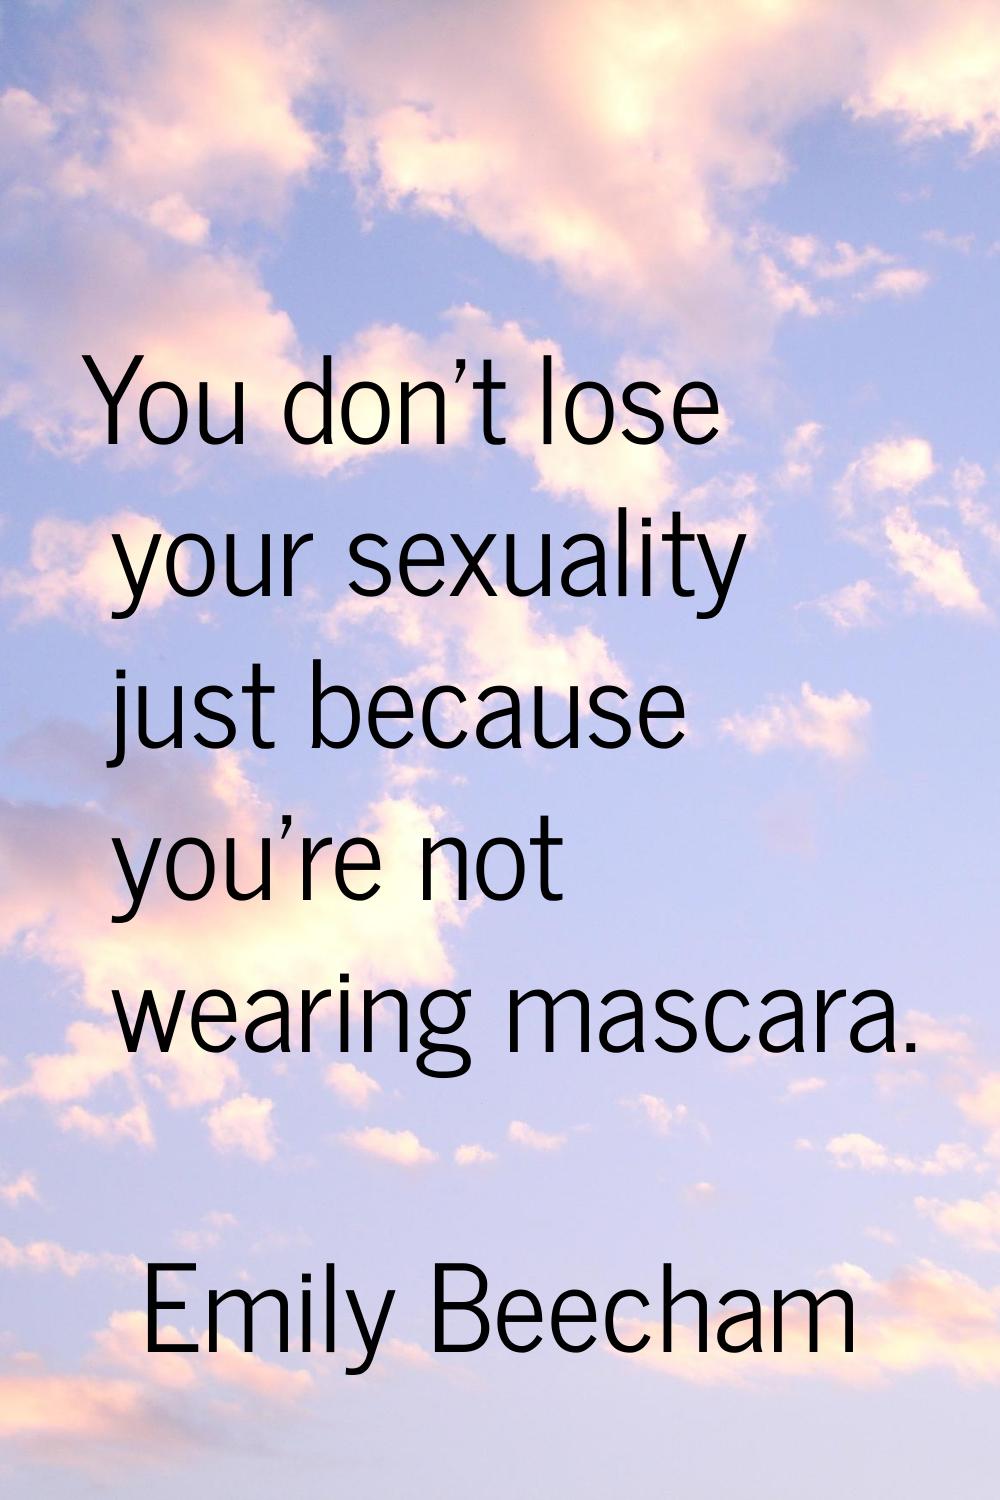 You don't lose your sexuality just because you're not wearing mascara.